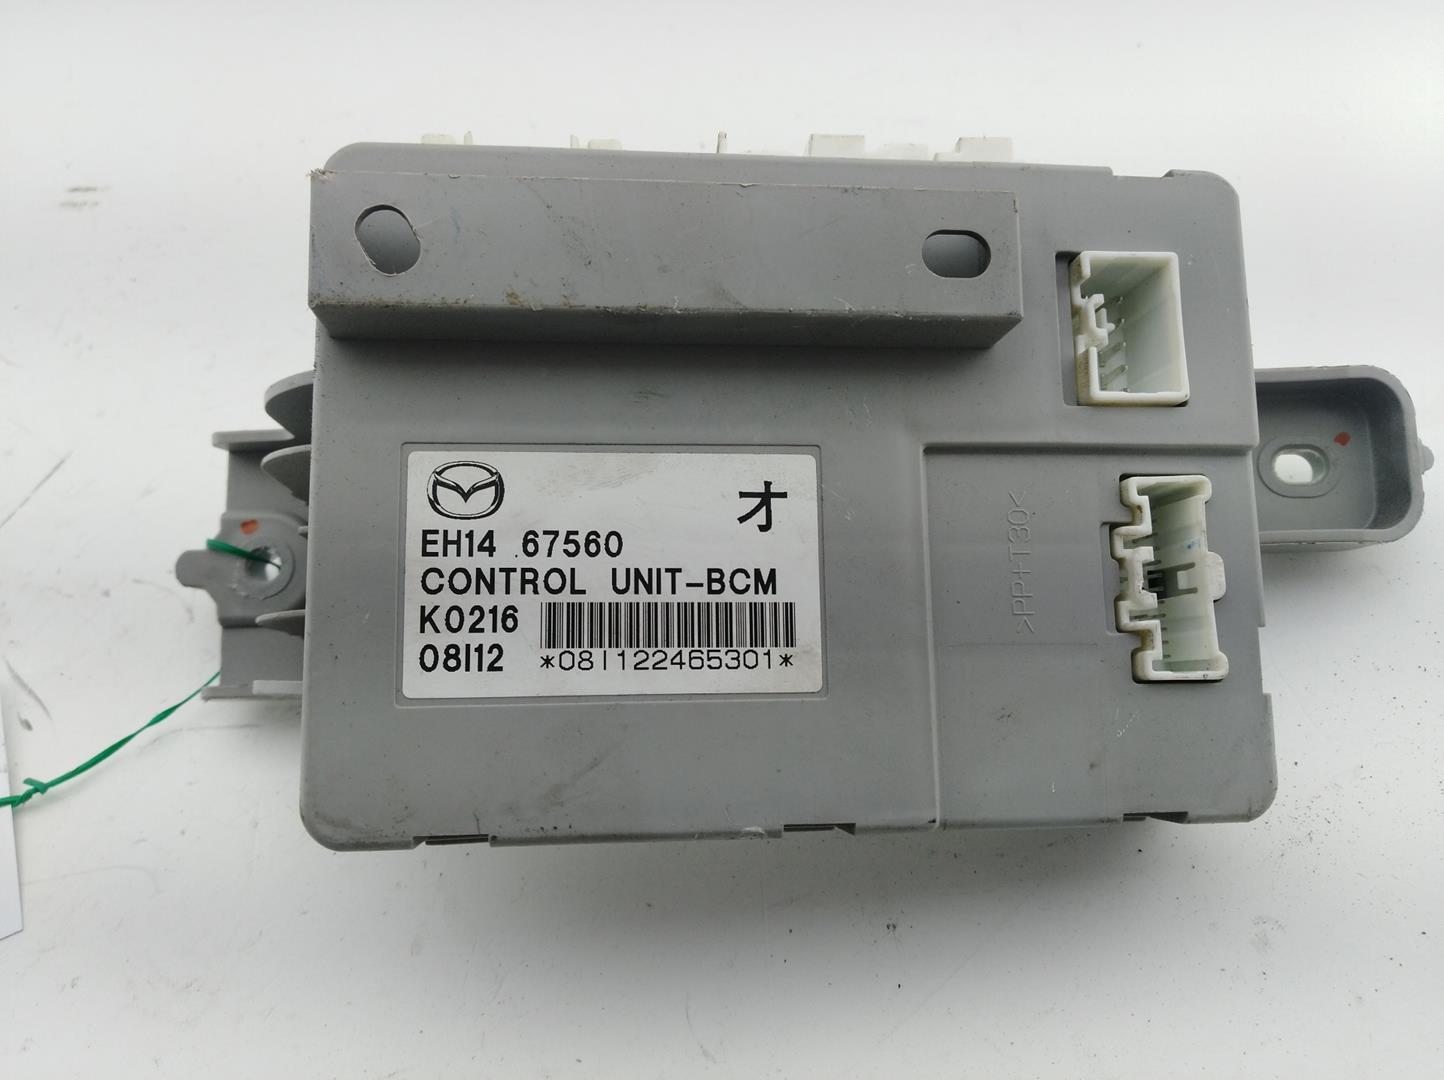 MAZDA CX-7 1 generation (2006-2012) Other Control Units EH1467560, EH1467560, EH1467560 24666315